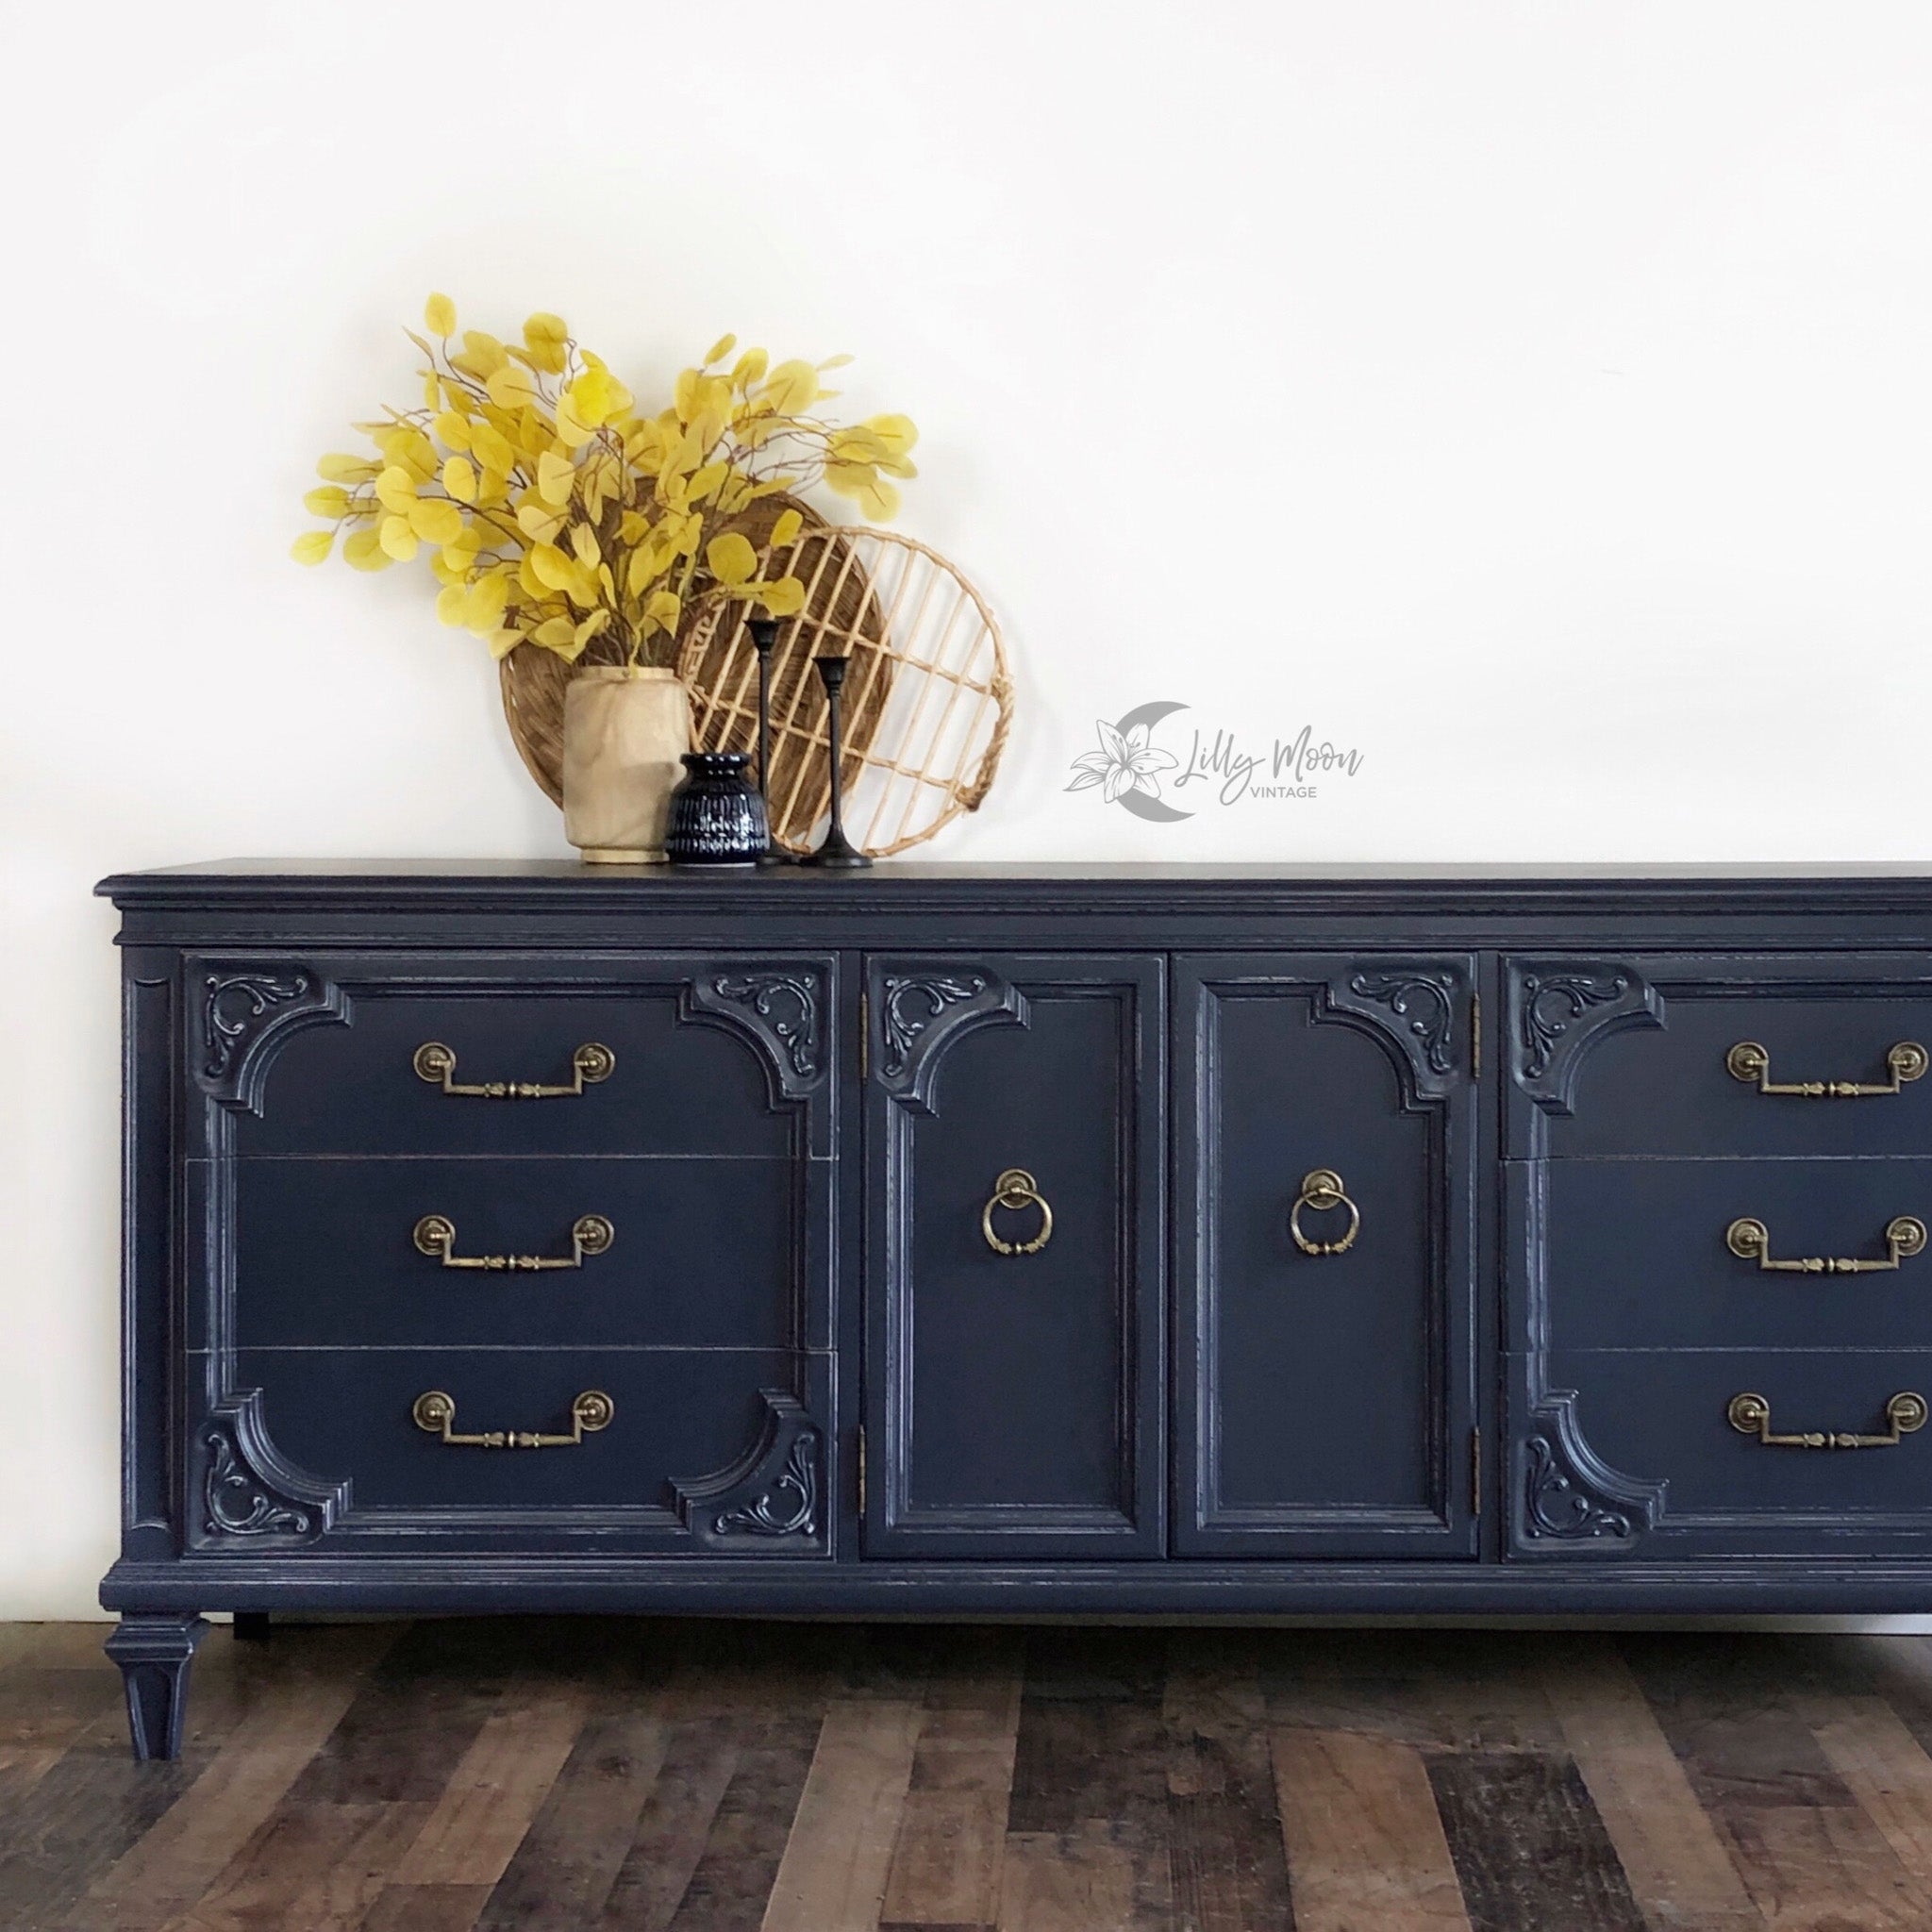 A vintage buffet table refurbished by Lilly Moon Vintage is painted in Dixie Belle's In the Navy chalk mineral paint.